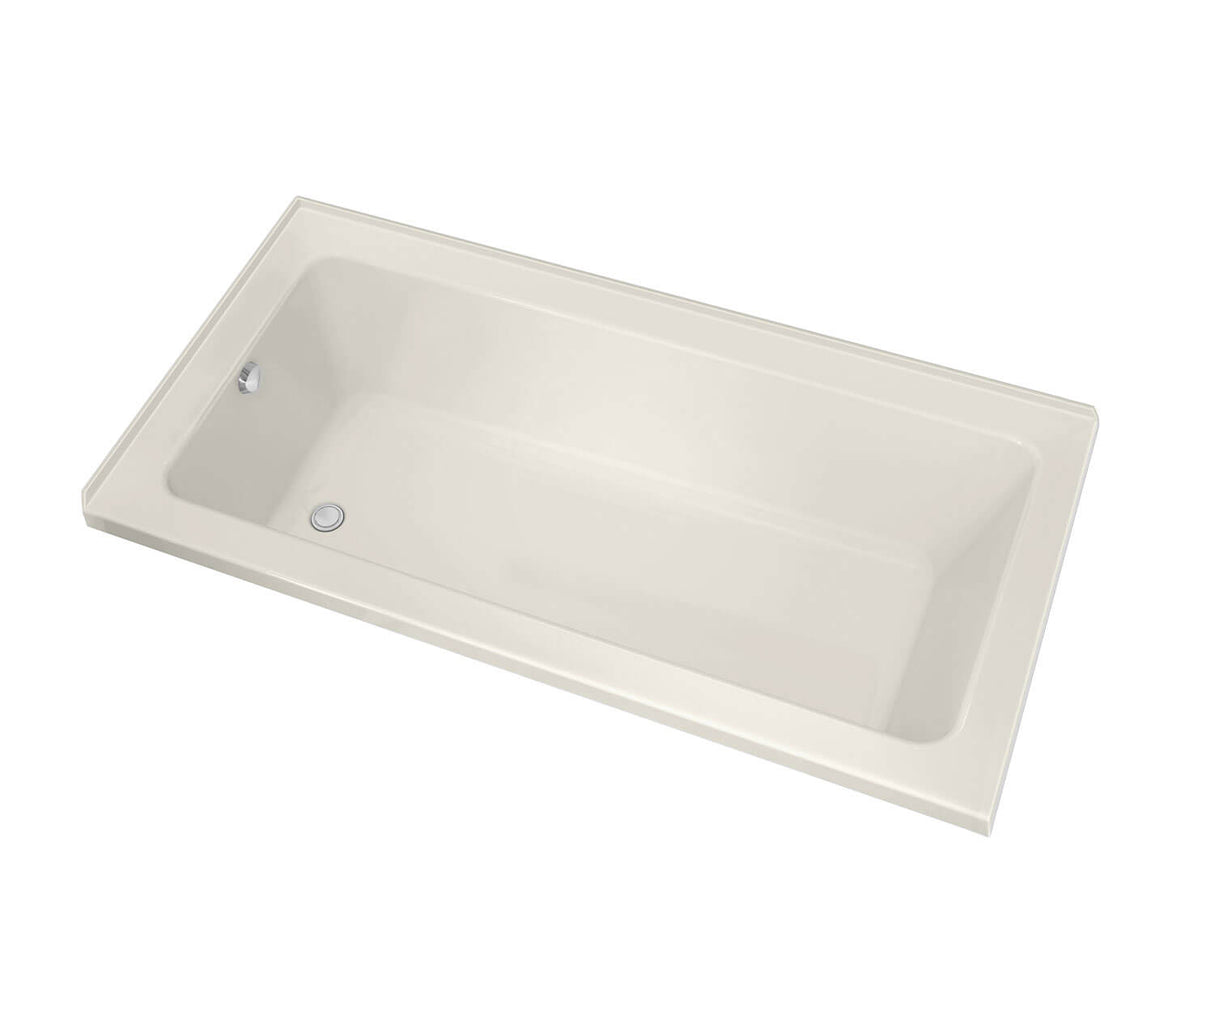 MAAX 106202-R-097-007 Pose 6032 IF Acrylic Corner Left Right-Hand Drain Combined Whirlpool & Aeroeffect Bathtub in Biscuit